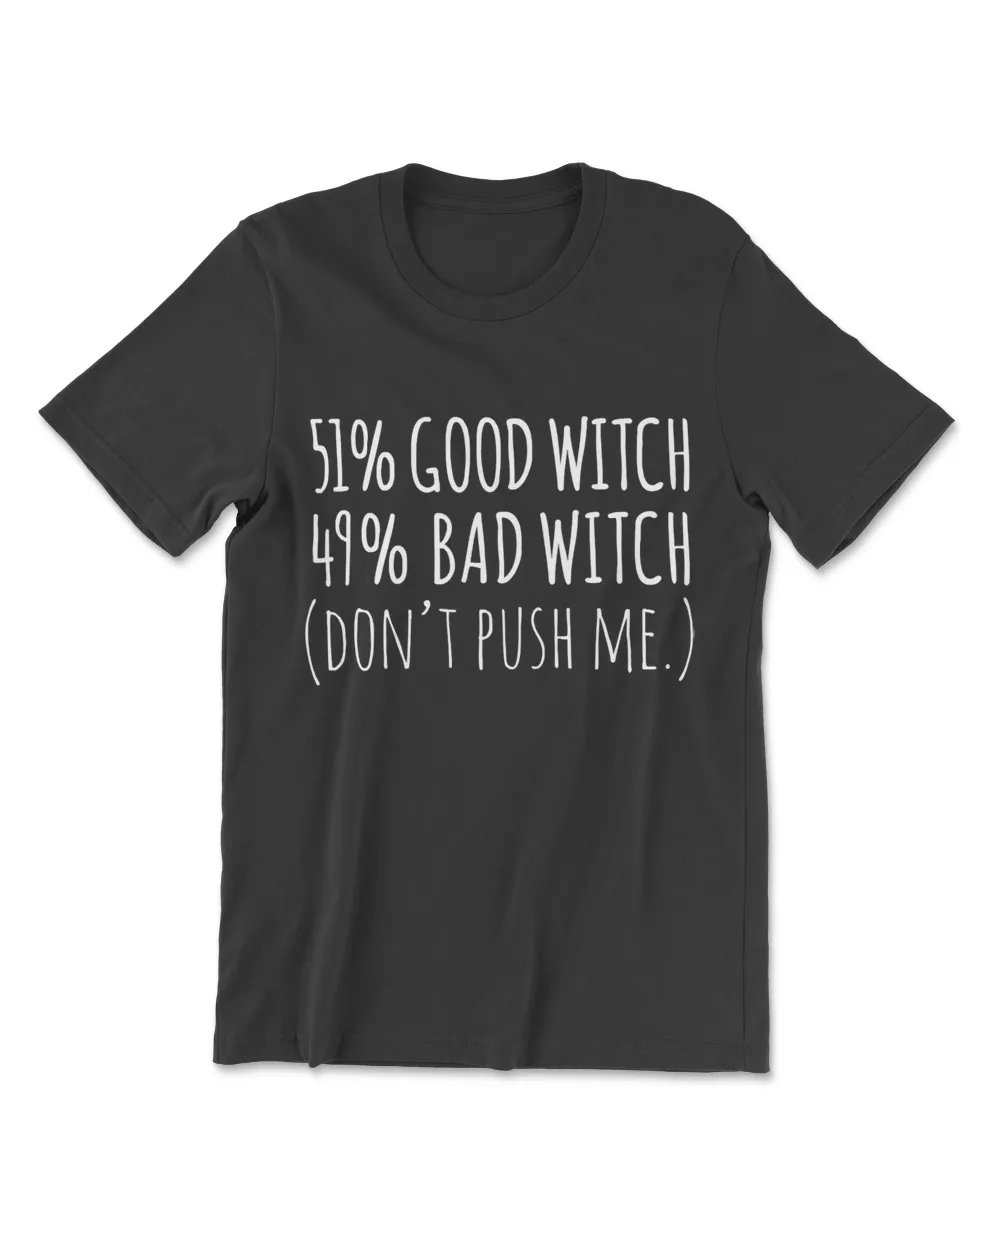 51 Good Witch 49 Bad Funny Halloween Gift Top For Women T-Shirt